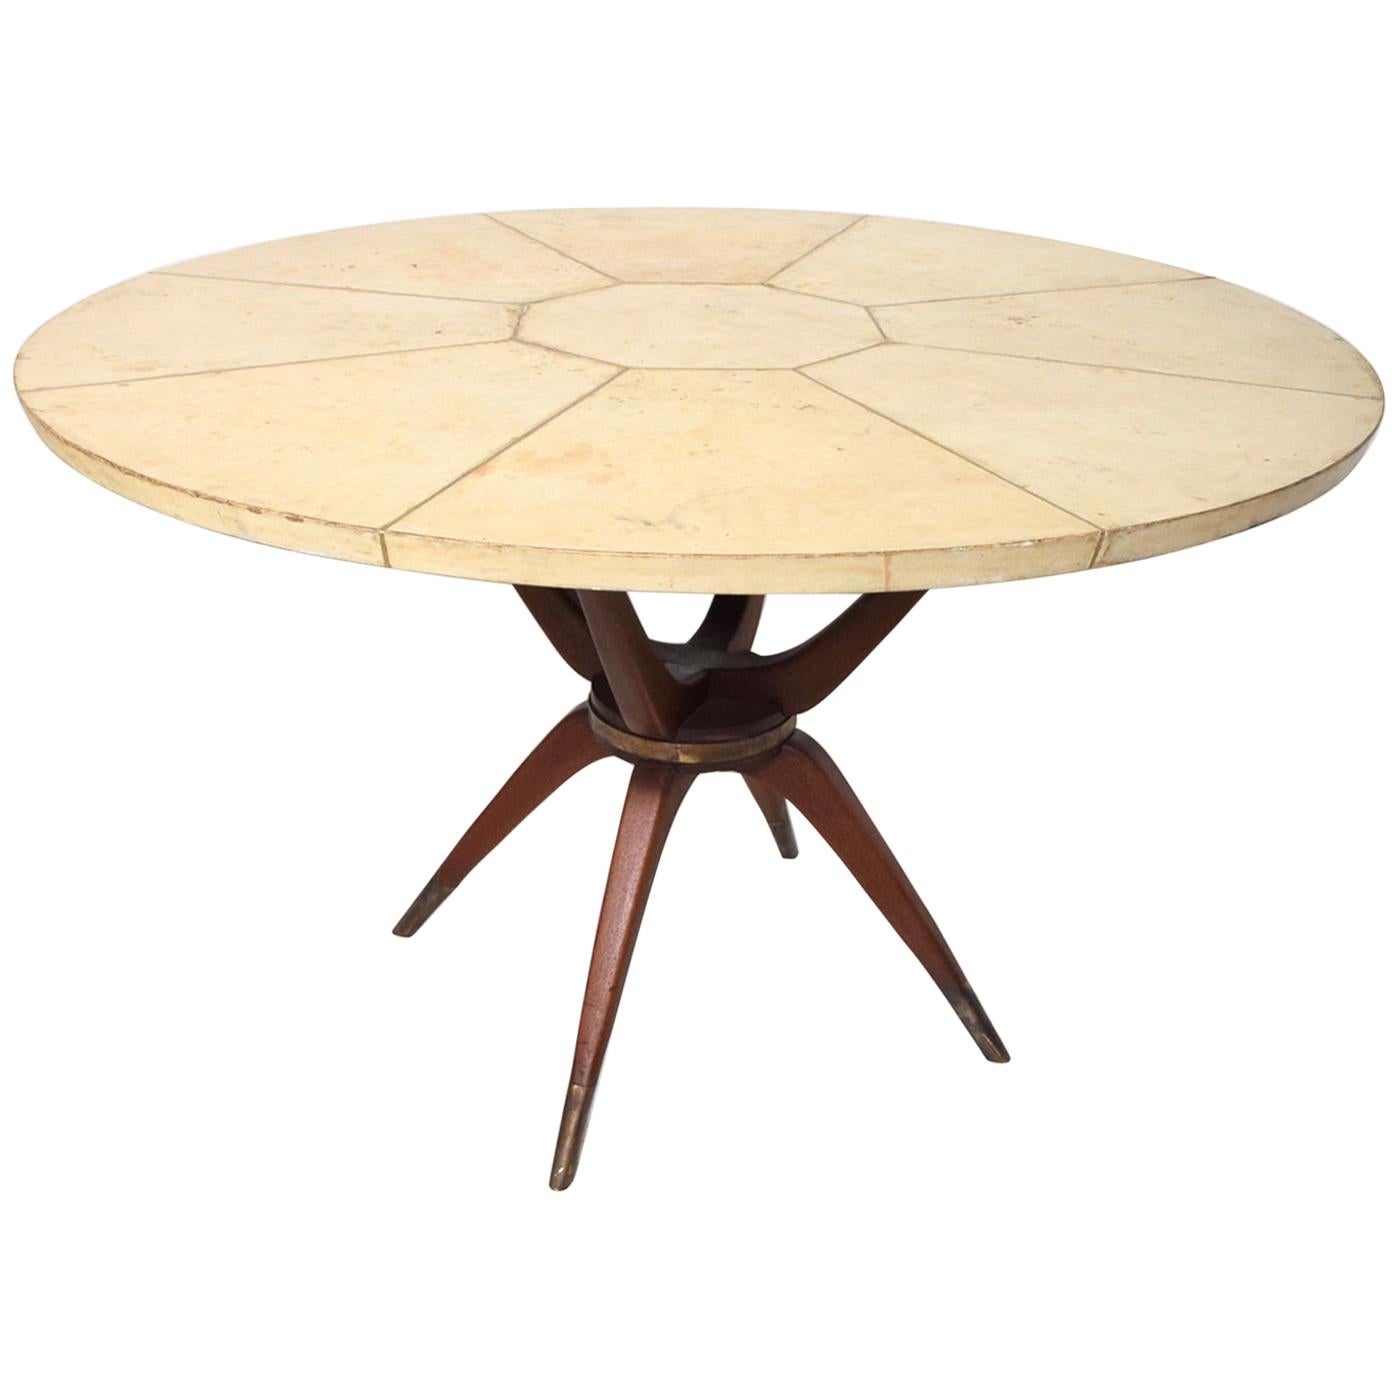 Splendid Round Dining Table in Goatskin Mahogany & Brass Mexican Modernism 1950s